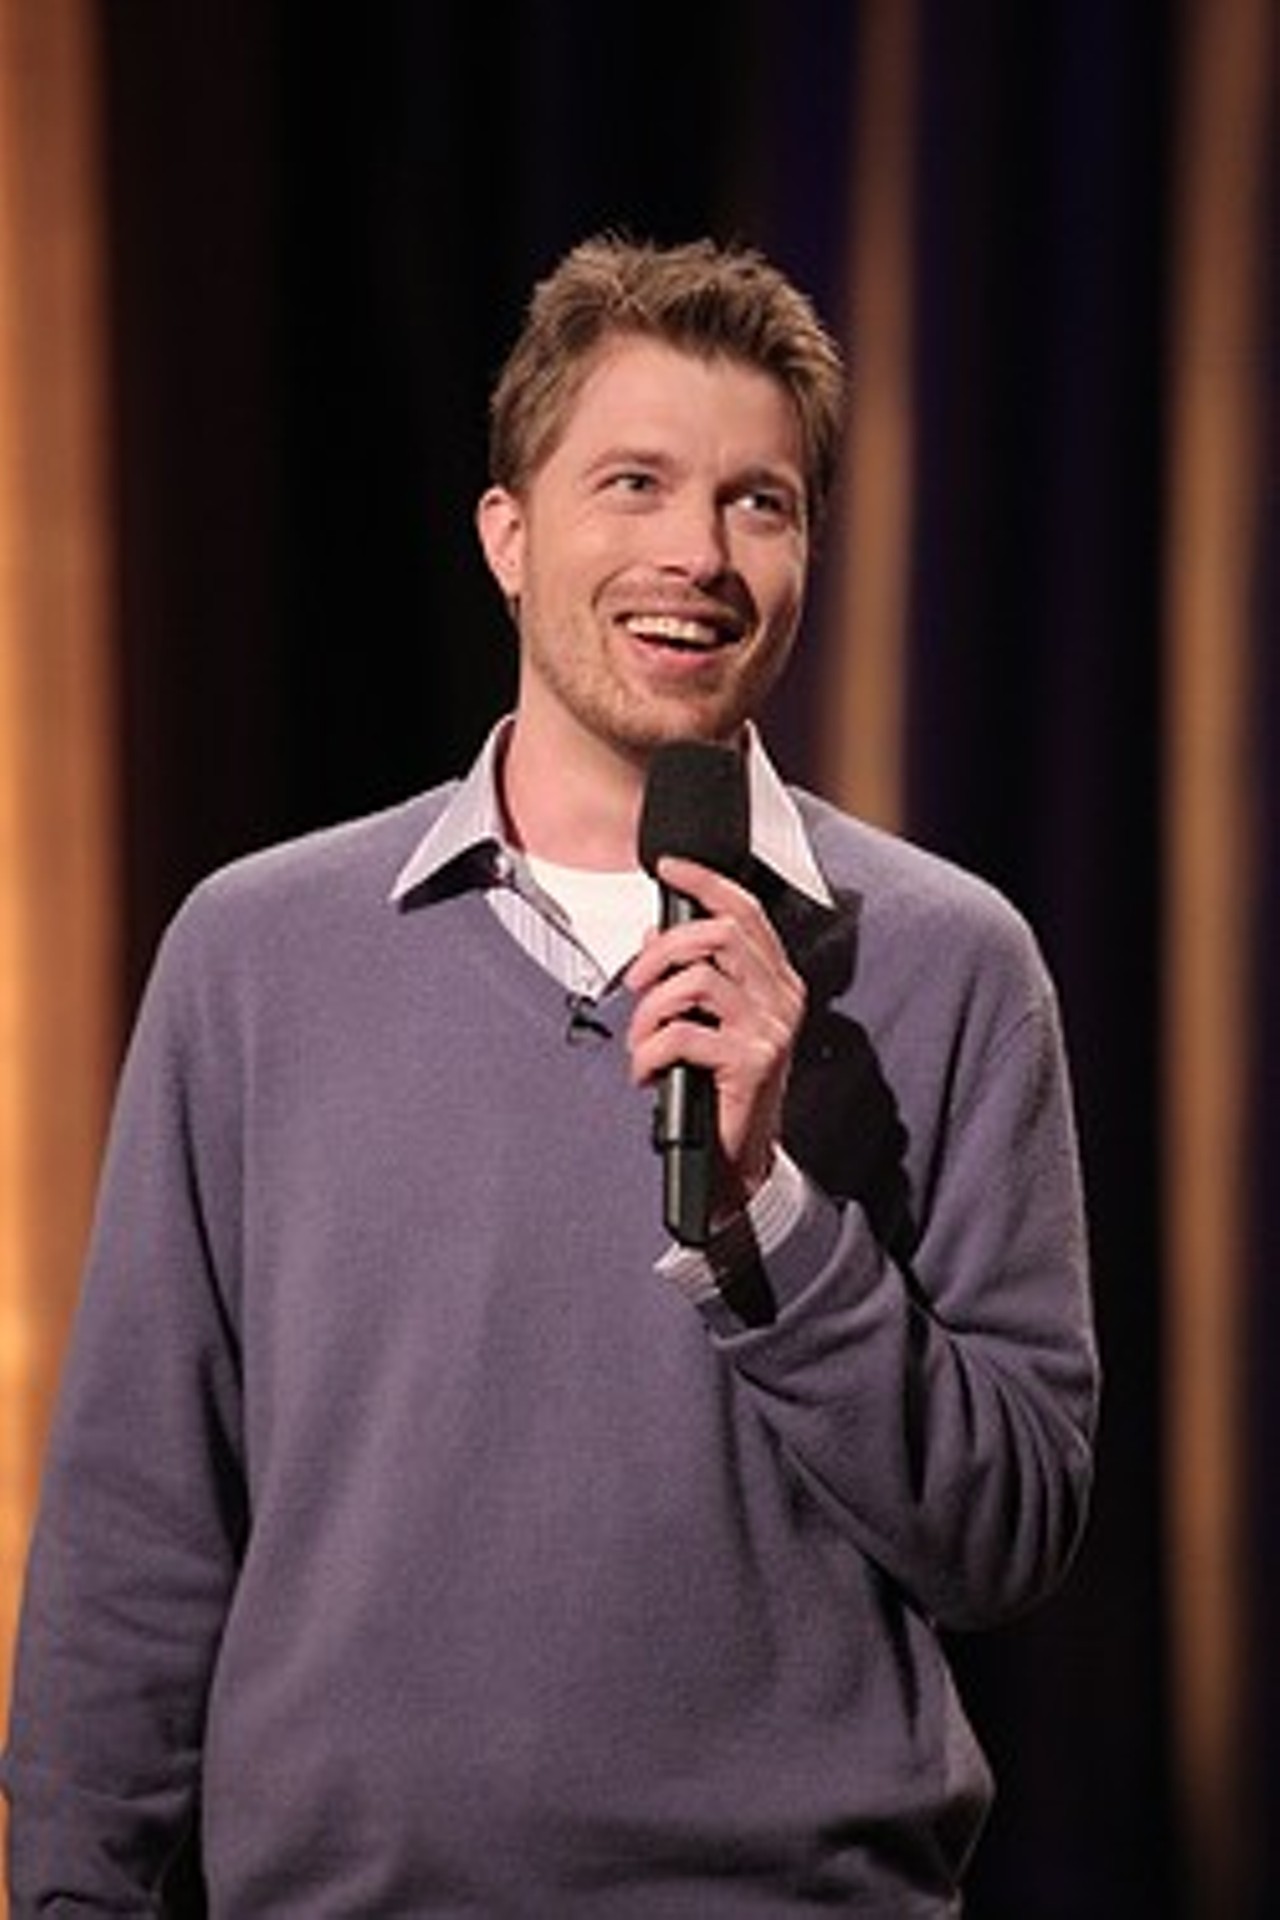 Wednesday, 1/18
Shane Mauss
@ Comedy Castle
Mauss has a resume similar to many comedians these days &#151; he won some stand-up comedy show, he&#146;s performed any number of times on late night talk shows, he has a Comedy Central special, and a show on Netflix. All that&#146;s great but it&#146;s like, how does that make him different from any other comedian? That&#146;s still a question we&#146;re trying to answer, but for the most part Mauss does appear to be funny. And although he hilariously tweets about Donald Trump and his supporters, this show is all about doing the drugs &#151; it&#146;s actually called Good Trip &#151; but we&#146;re guessing he&#146;ll find a way to fold the topic of politics somewhere too. 
Doors open at 6:30; show starts at 7:30 p.m.; 310 S. Troy St., Royal Oak; comedycastle.com; 248-542-9900; tickets are $10.